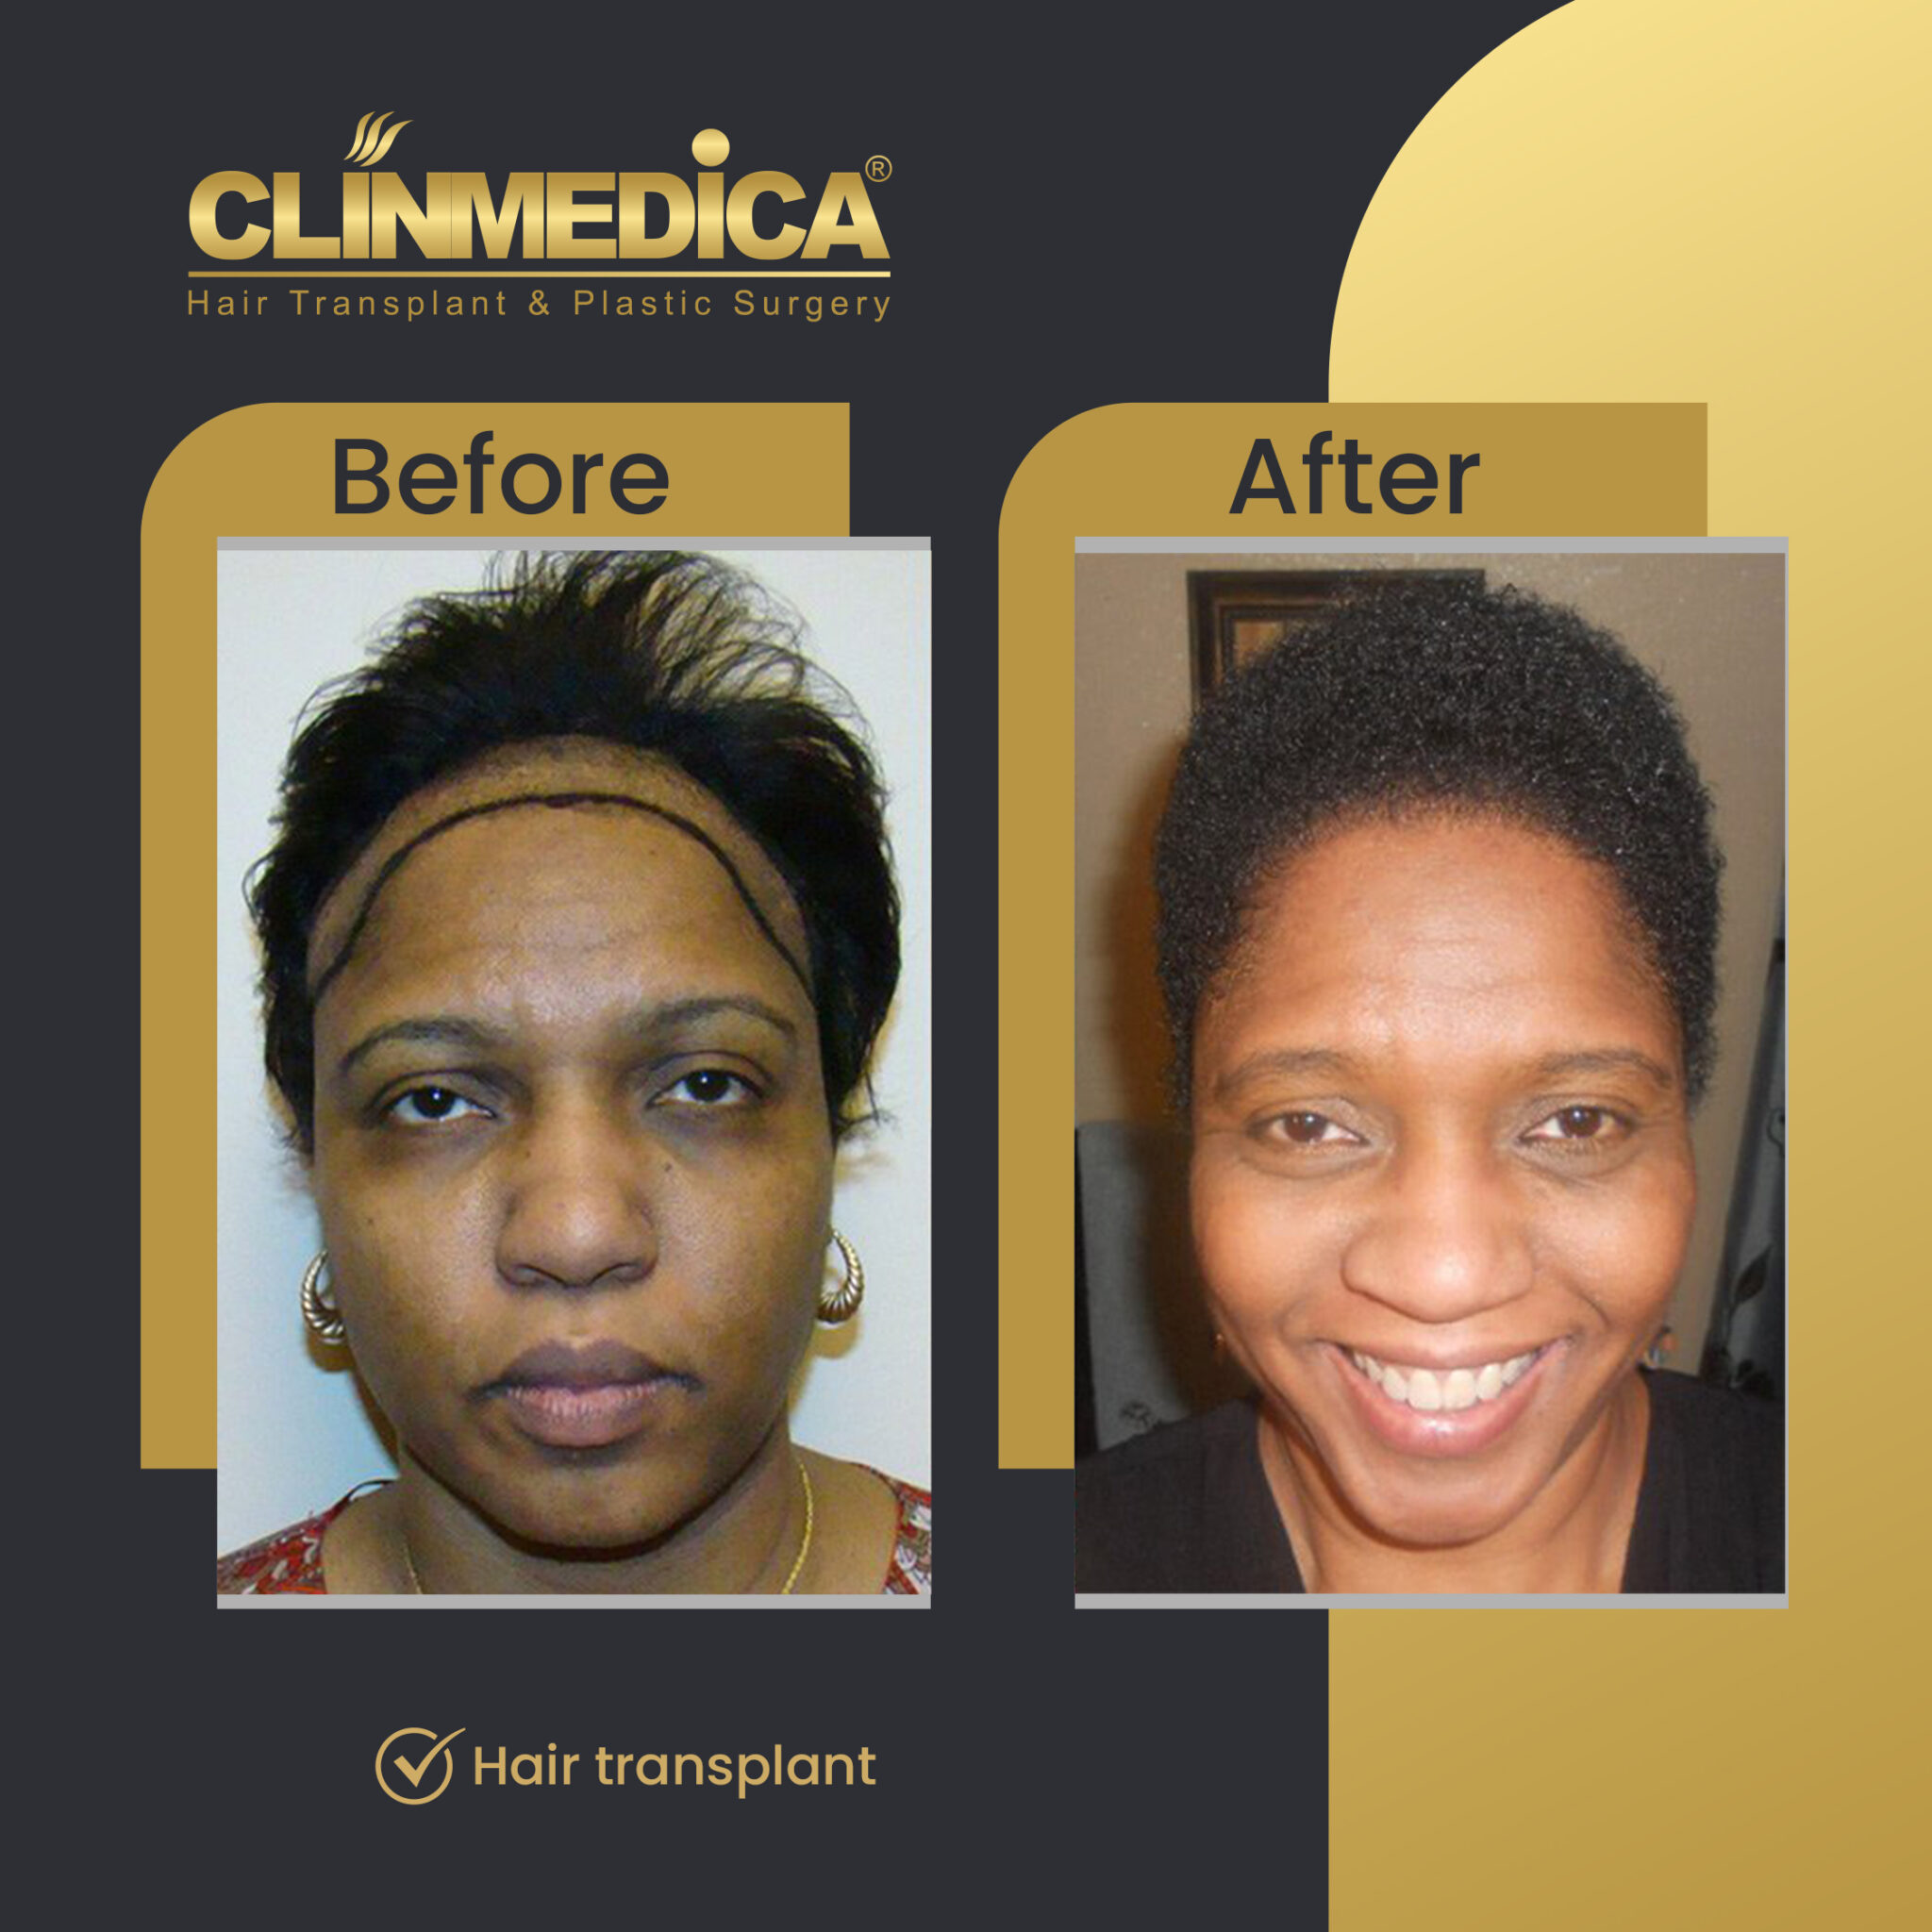 Afro-Hair-Transplant-for-women-Before-&-After-clinmedica-08